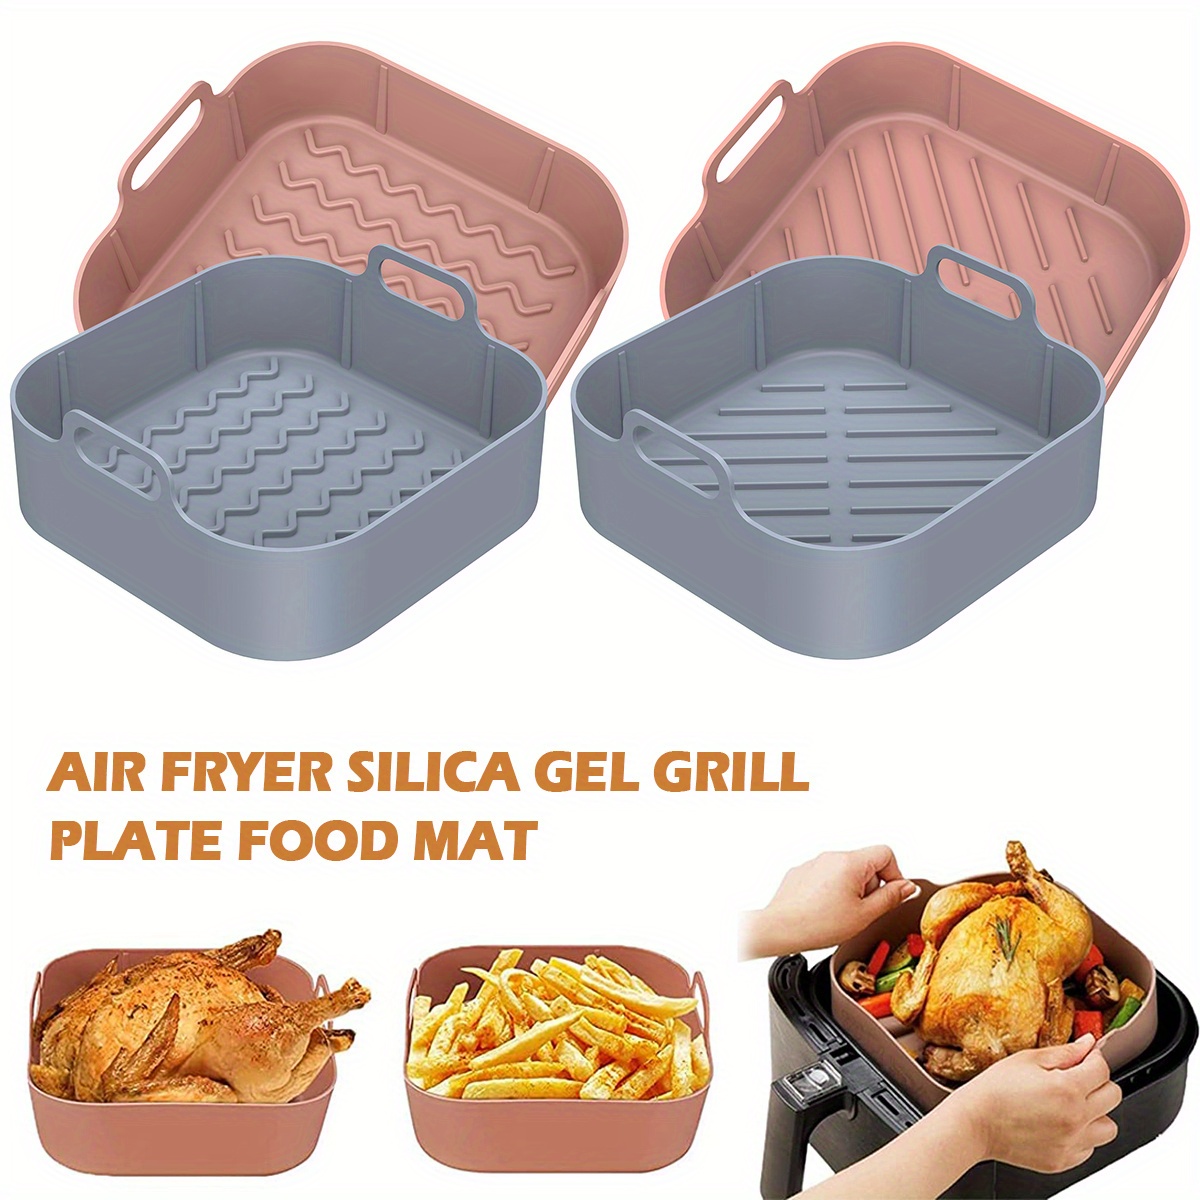 Silicone Air Fryer Liner 2PCS Square Air Fryer Liner 8 inch